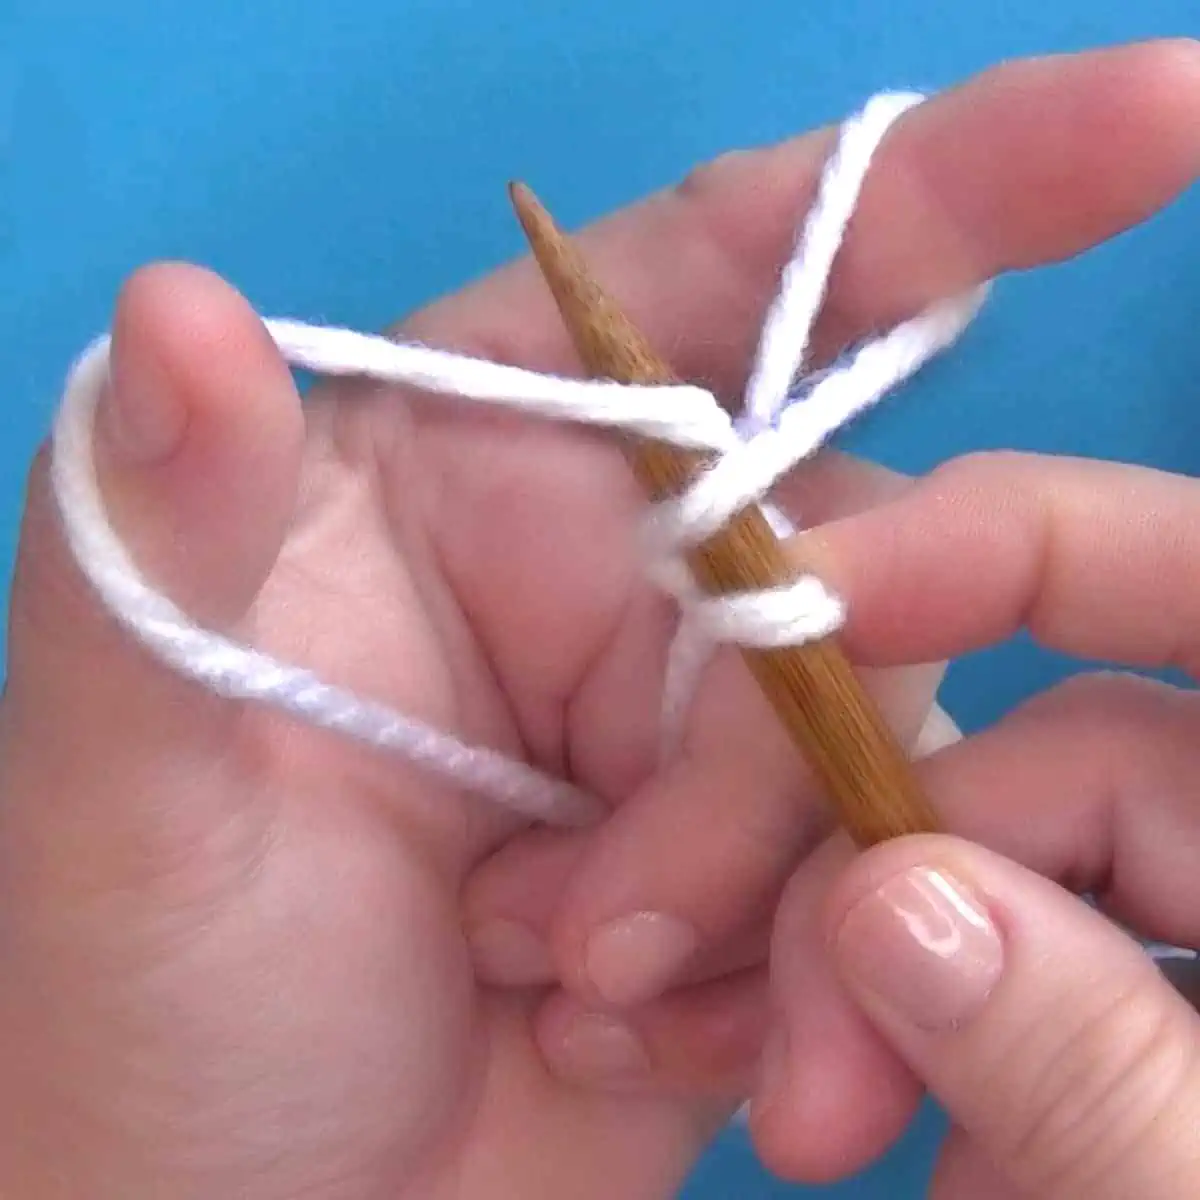 Hands demonstrating How to Long Tail Cast On Purlwise with yarn and knitting needles.